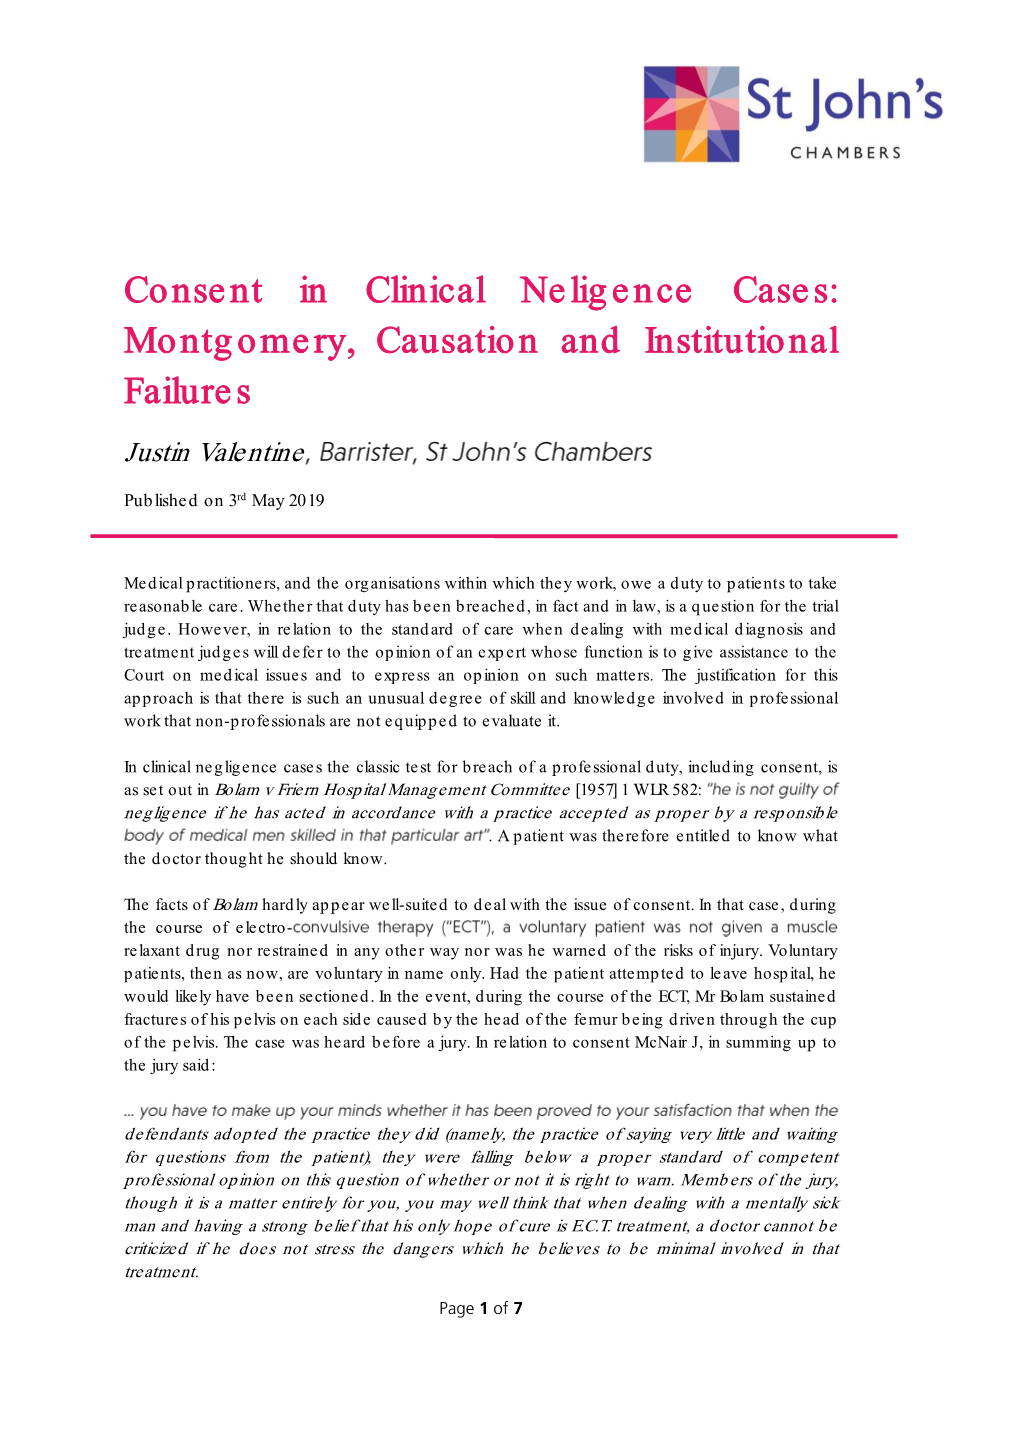 Consent in Clinical Neligence Cases: Montgomery, Causation and Institutional Failures